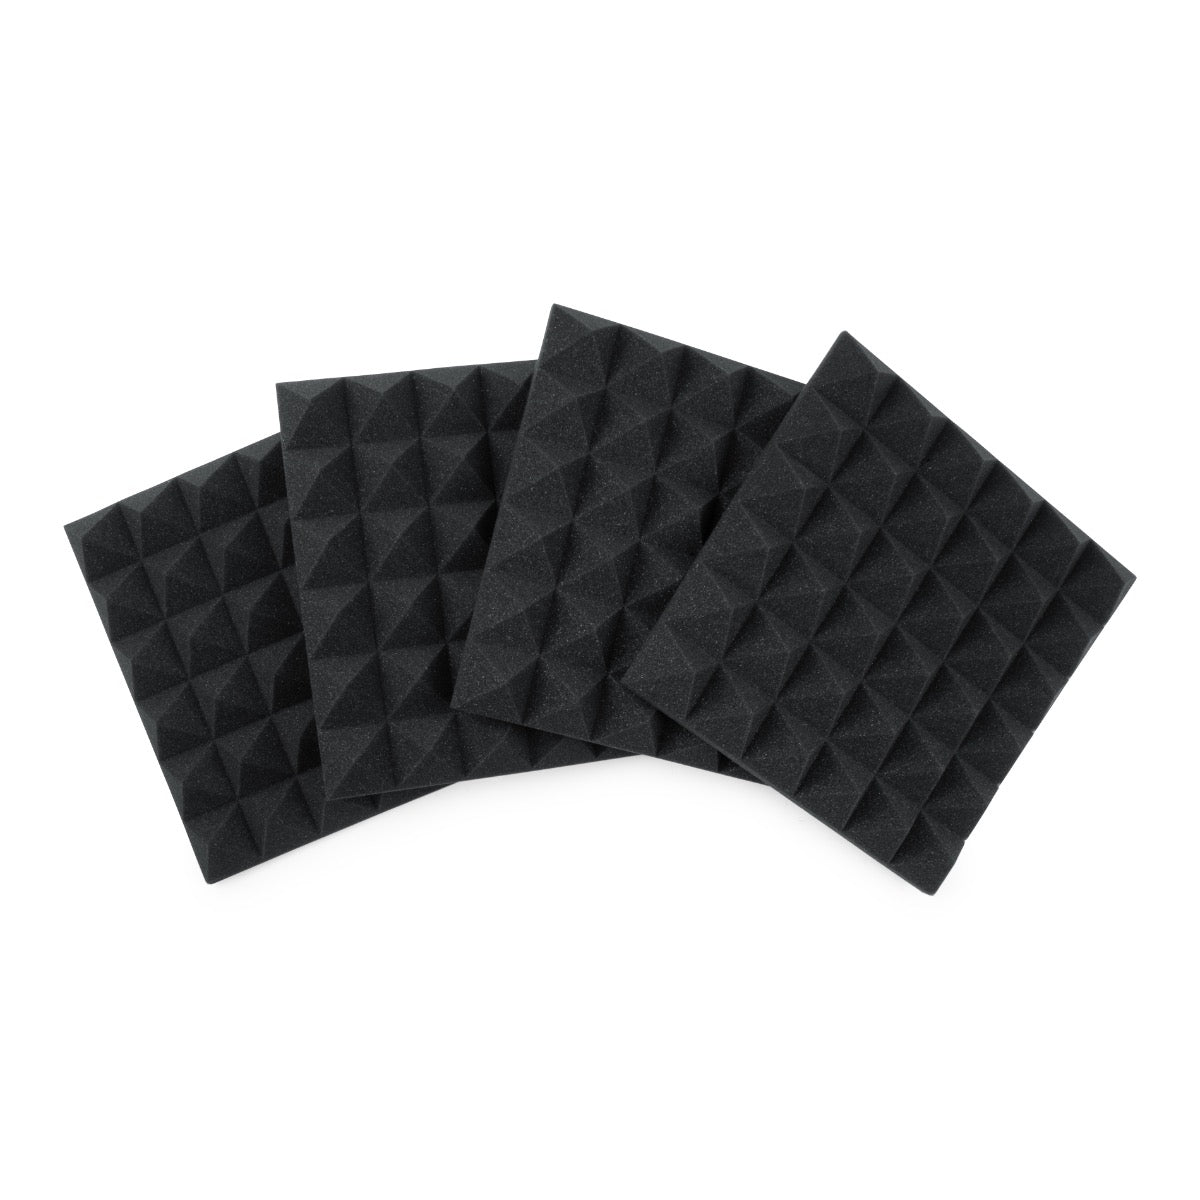 Gator 2" Thick Acoustic Foam Pyramid Panels 12"x12" 4pk - Charcoal, View 1